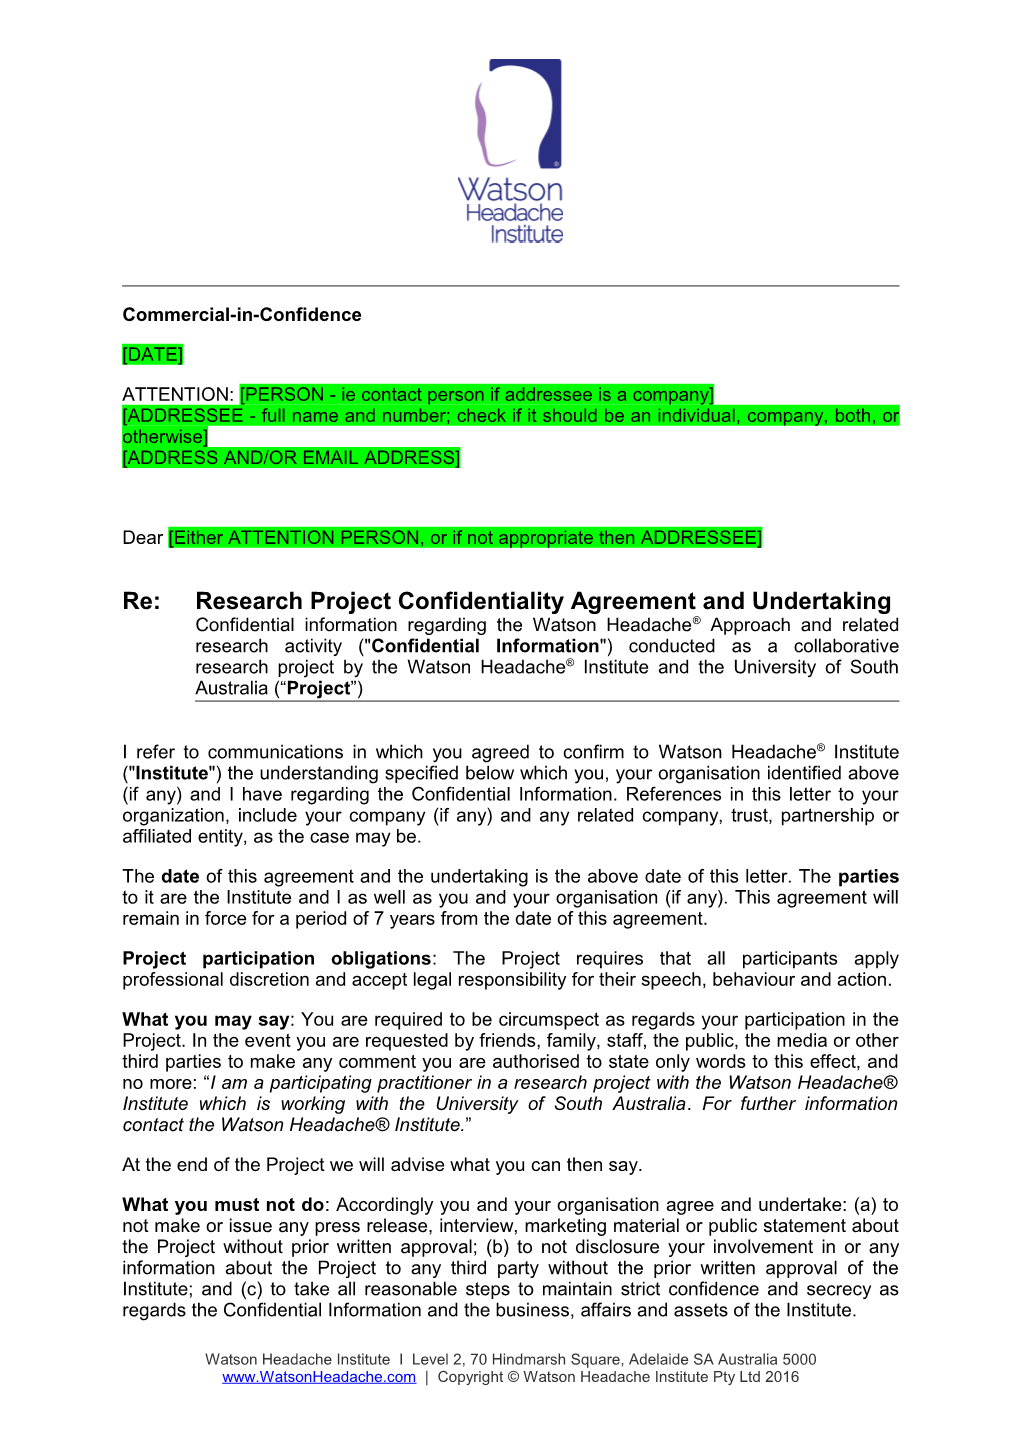 Research Project Confidentiality Agreement & Undertaking